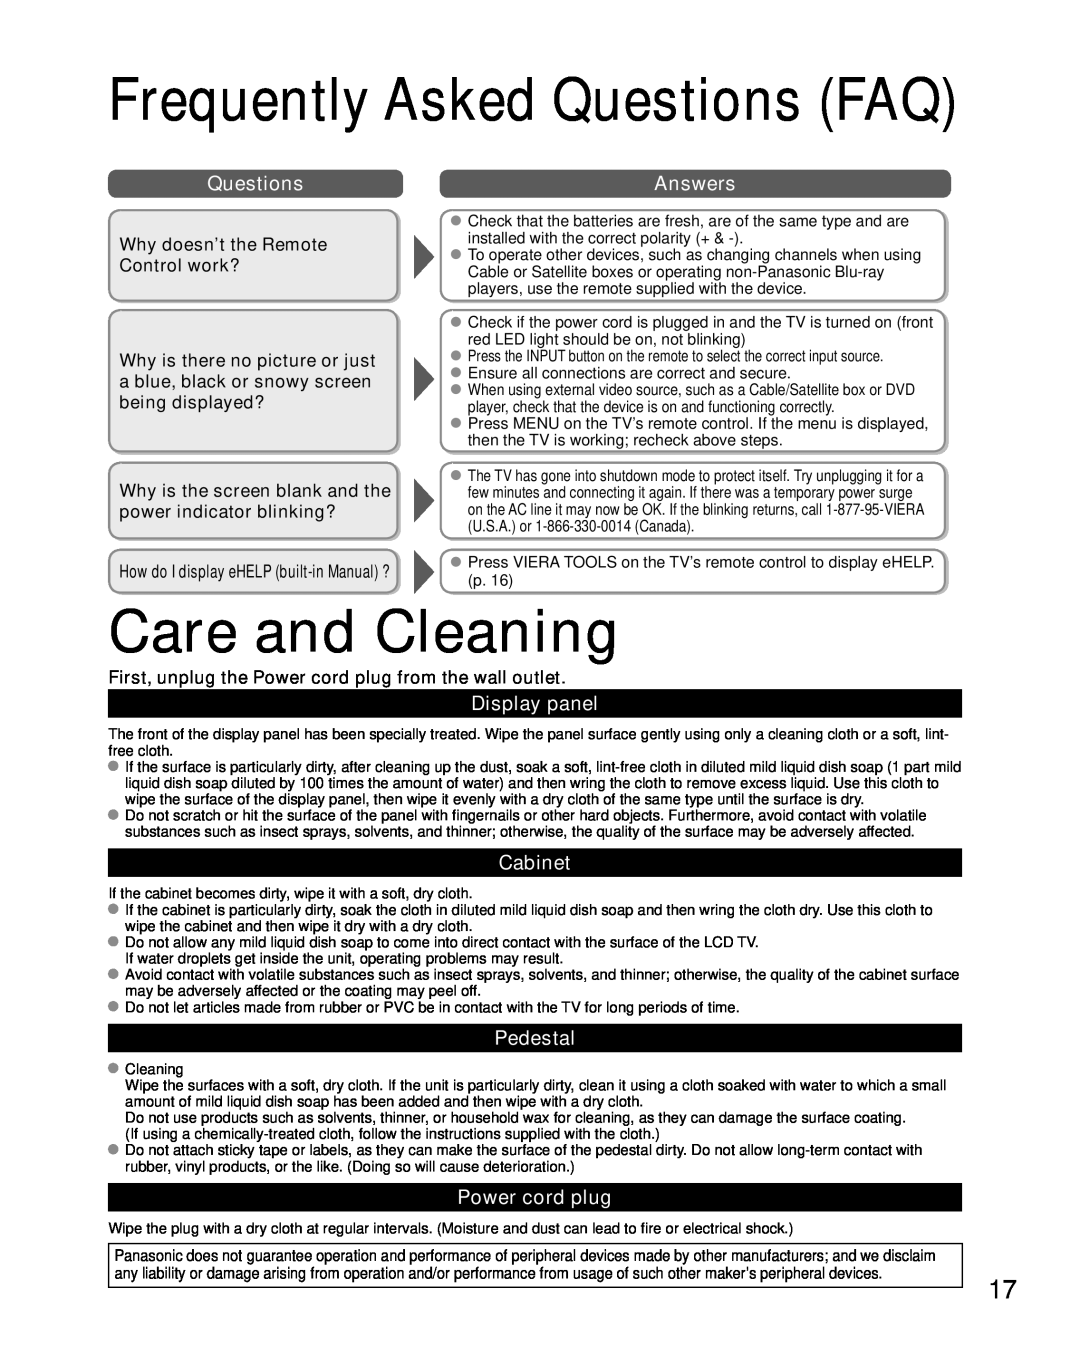 Panasonic TC-L47ET5, TCL42E50 Care and Cleaning, Frequently Asked Questions FAQ, Answers, Display panel, Cabinet, Pedestal 